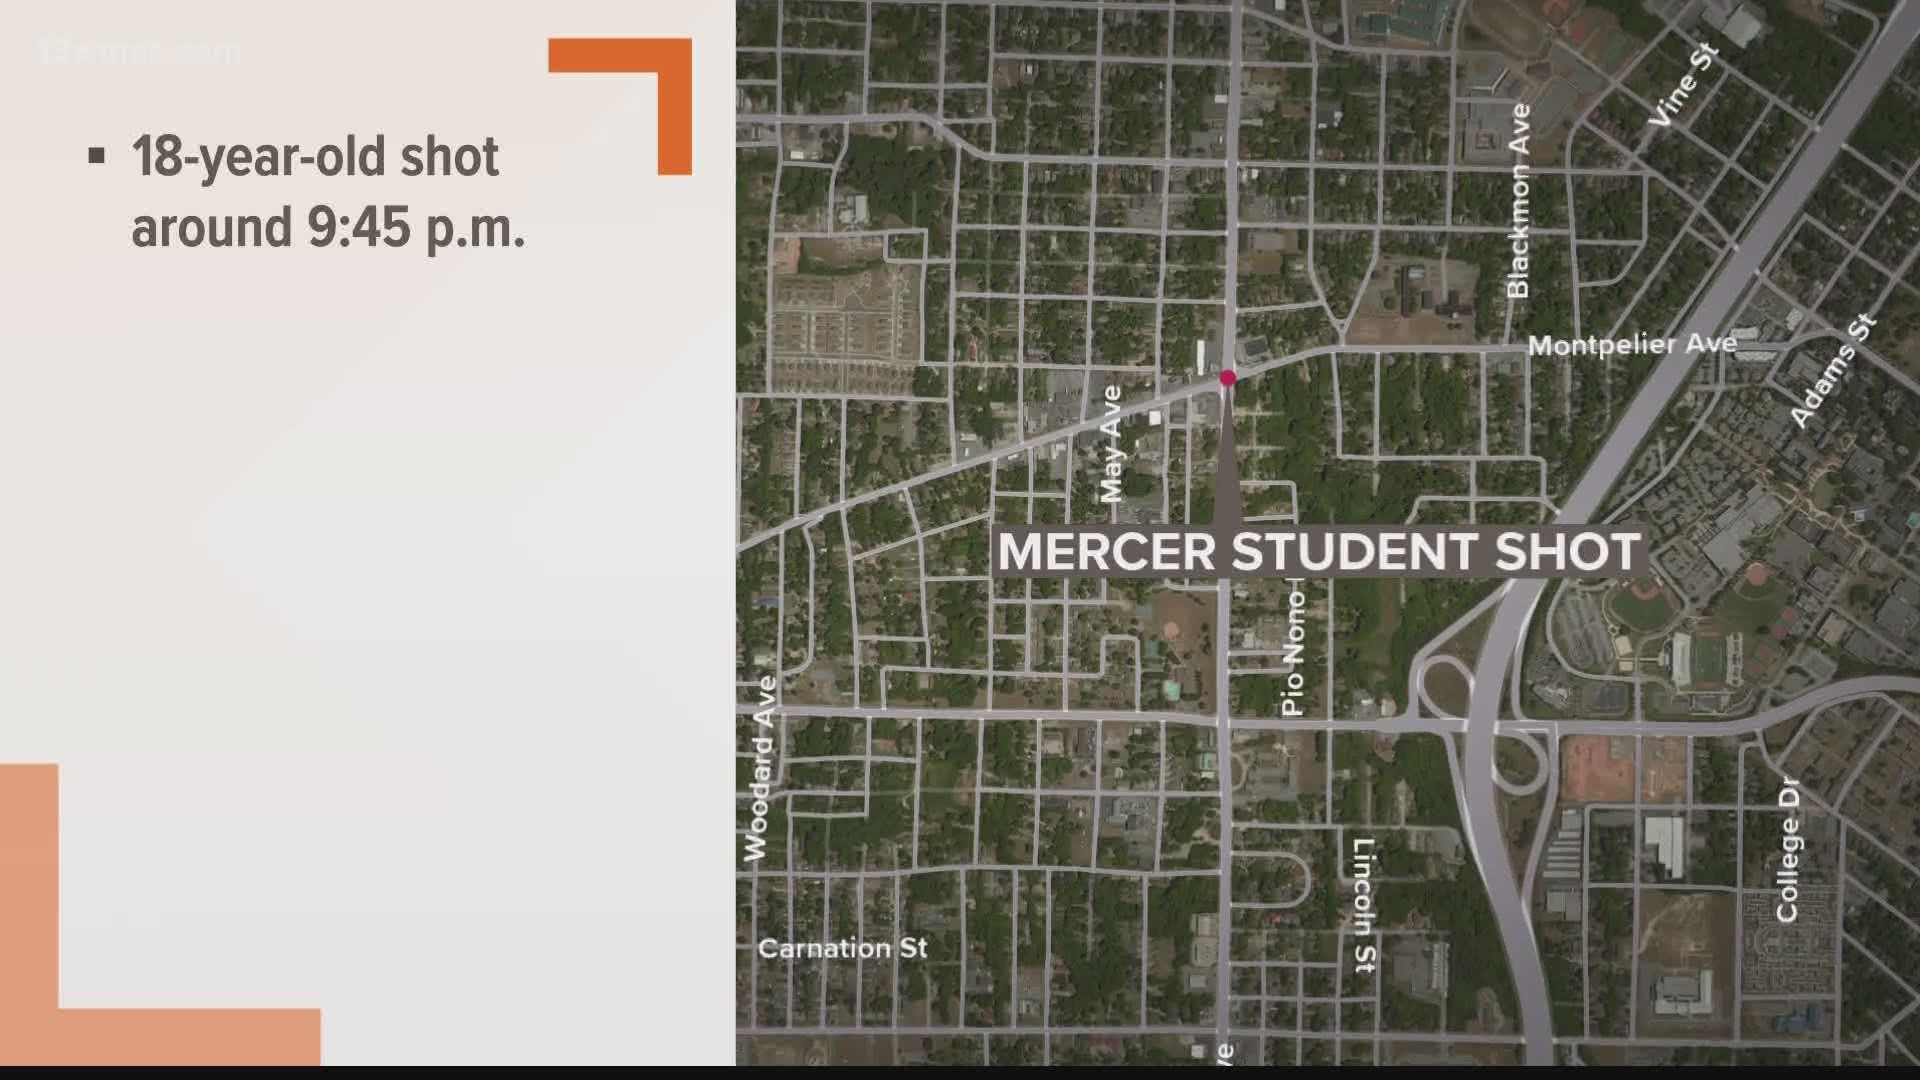 According to an email sent to Mercer students, the victim and her two passengers were on their way back to campus when someone shot at their car